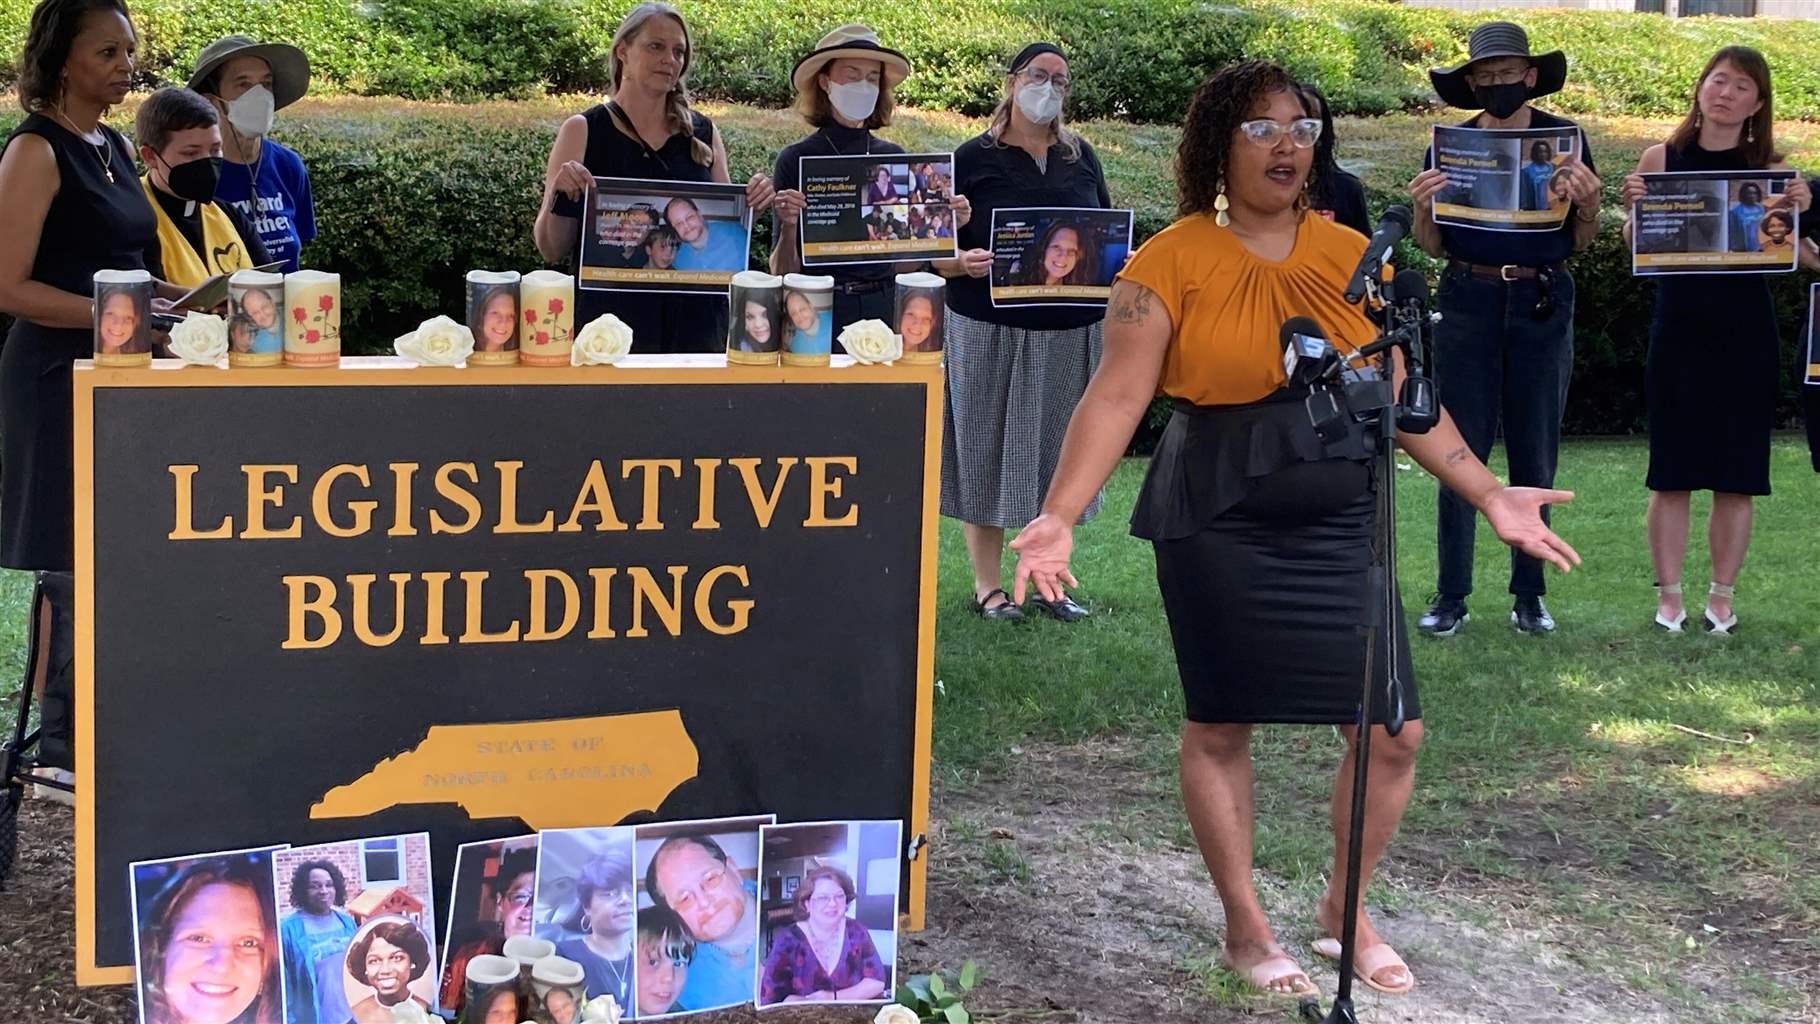 Courtney Crudup, 32, of Oxford, N.C., speaks outside the North Carolina Legislative Building in Raleigh at a July news conference and vigil urging lawmakers to expand Medicaid. North Carolina appears likely to become the 40th state to expand the program.